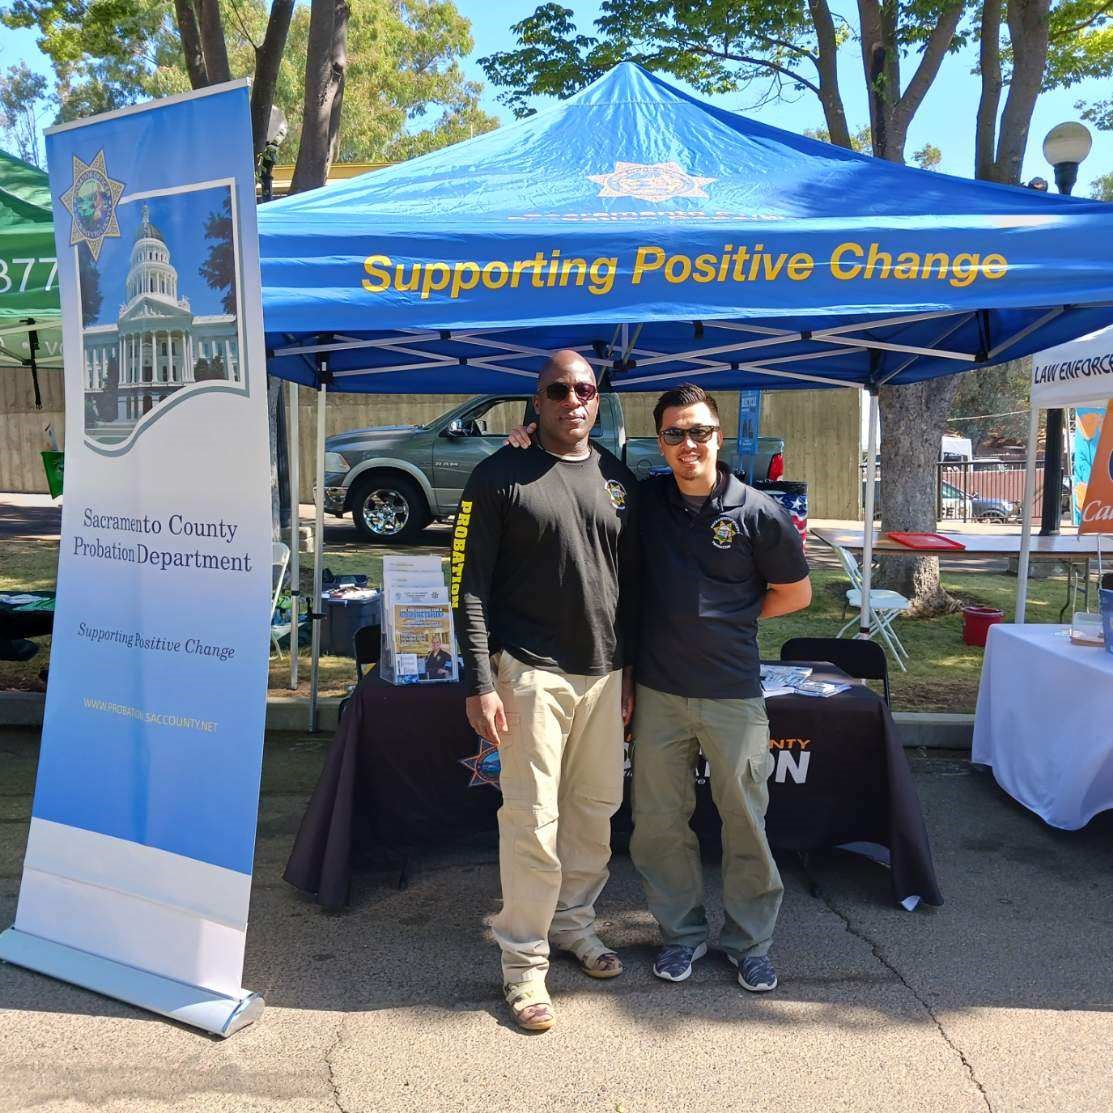 COME SEE US AT THE CALIFORNIA STATE FAIR TODAY! Today is FREE admission all day for active duty, reserve and veterans from all branches of the military, & active first responders. #castatefair #sacramentocountyprobation #wearehiring #supportingpositivechange